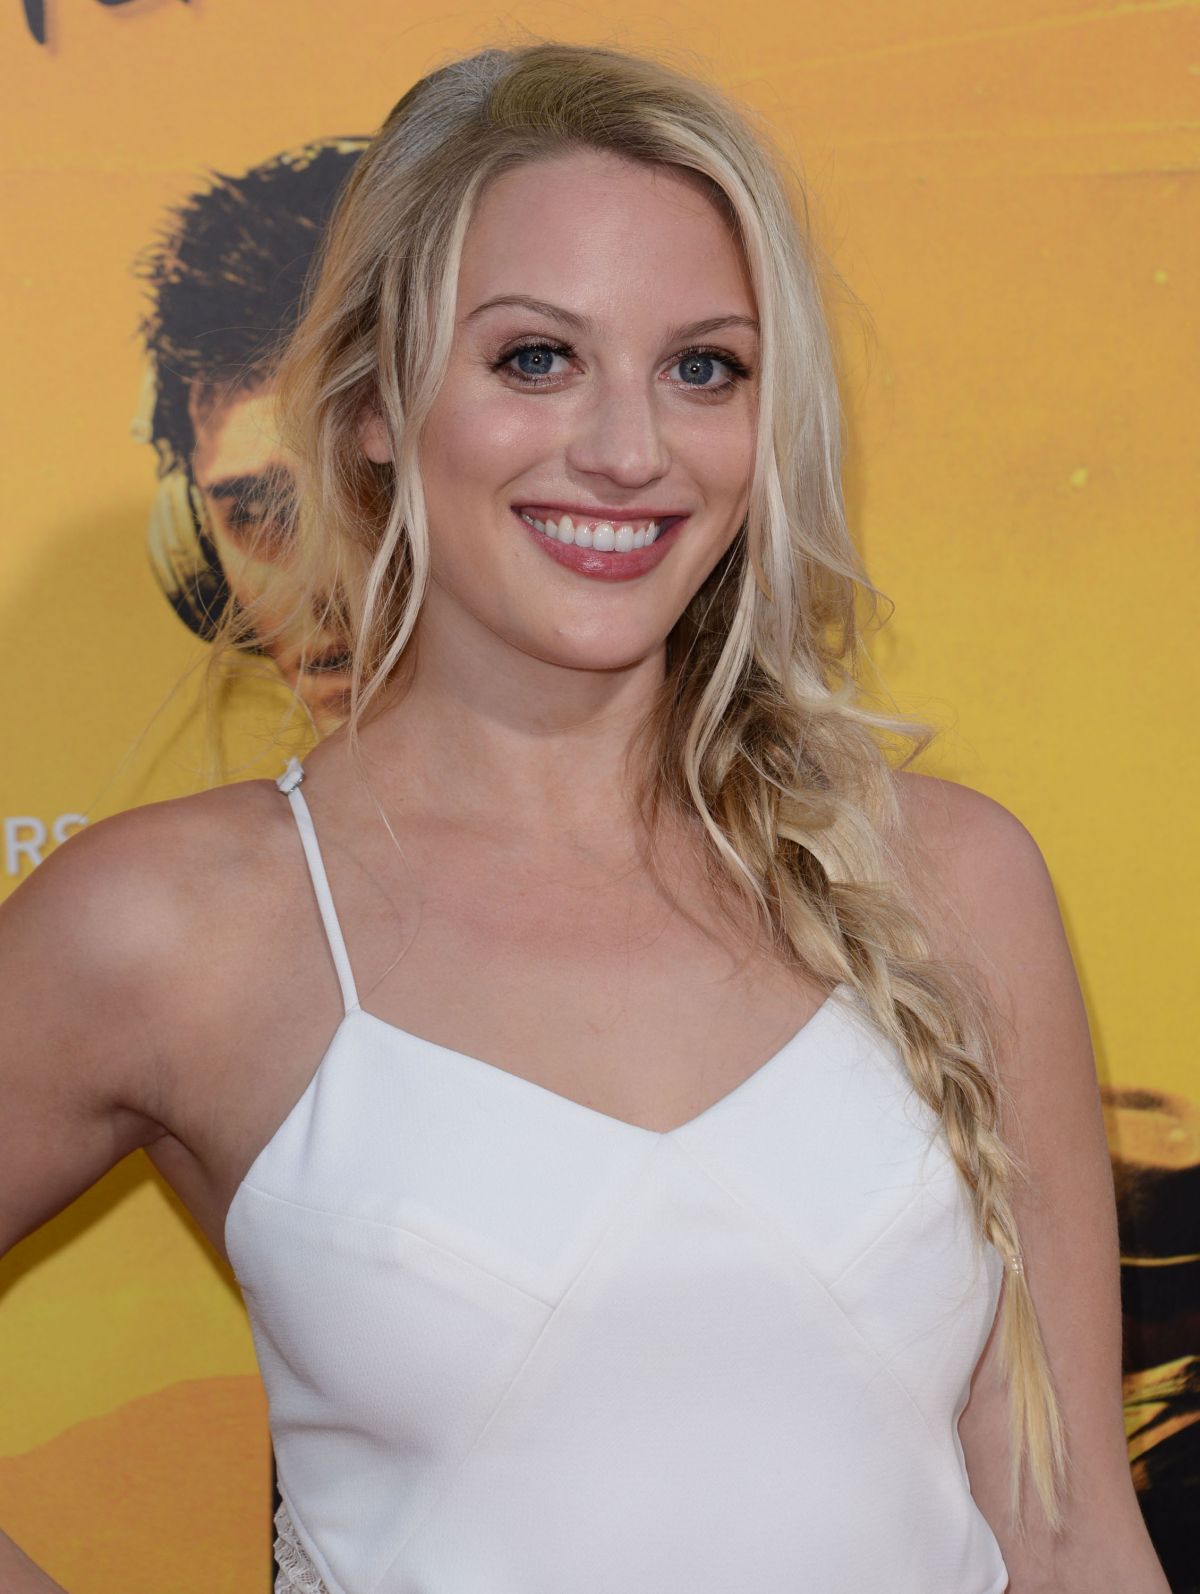 KIRBY BLISS BLANTON at We Are Your Friends Premiere in Los Angeles.